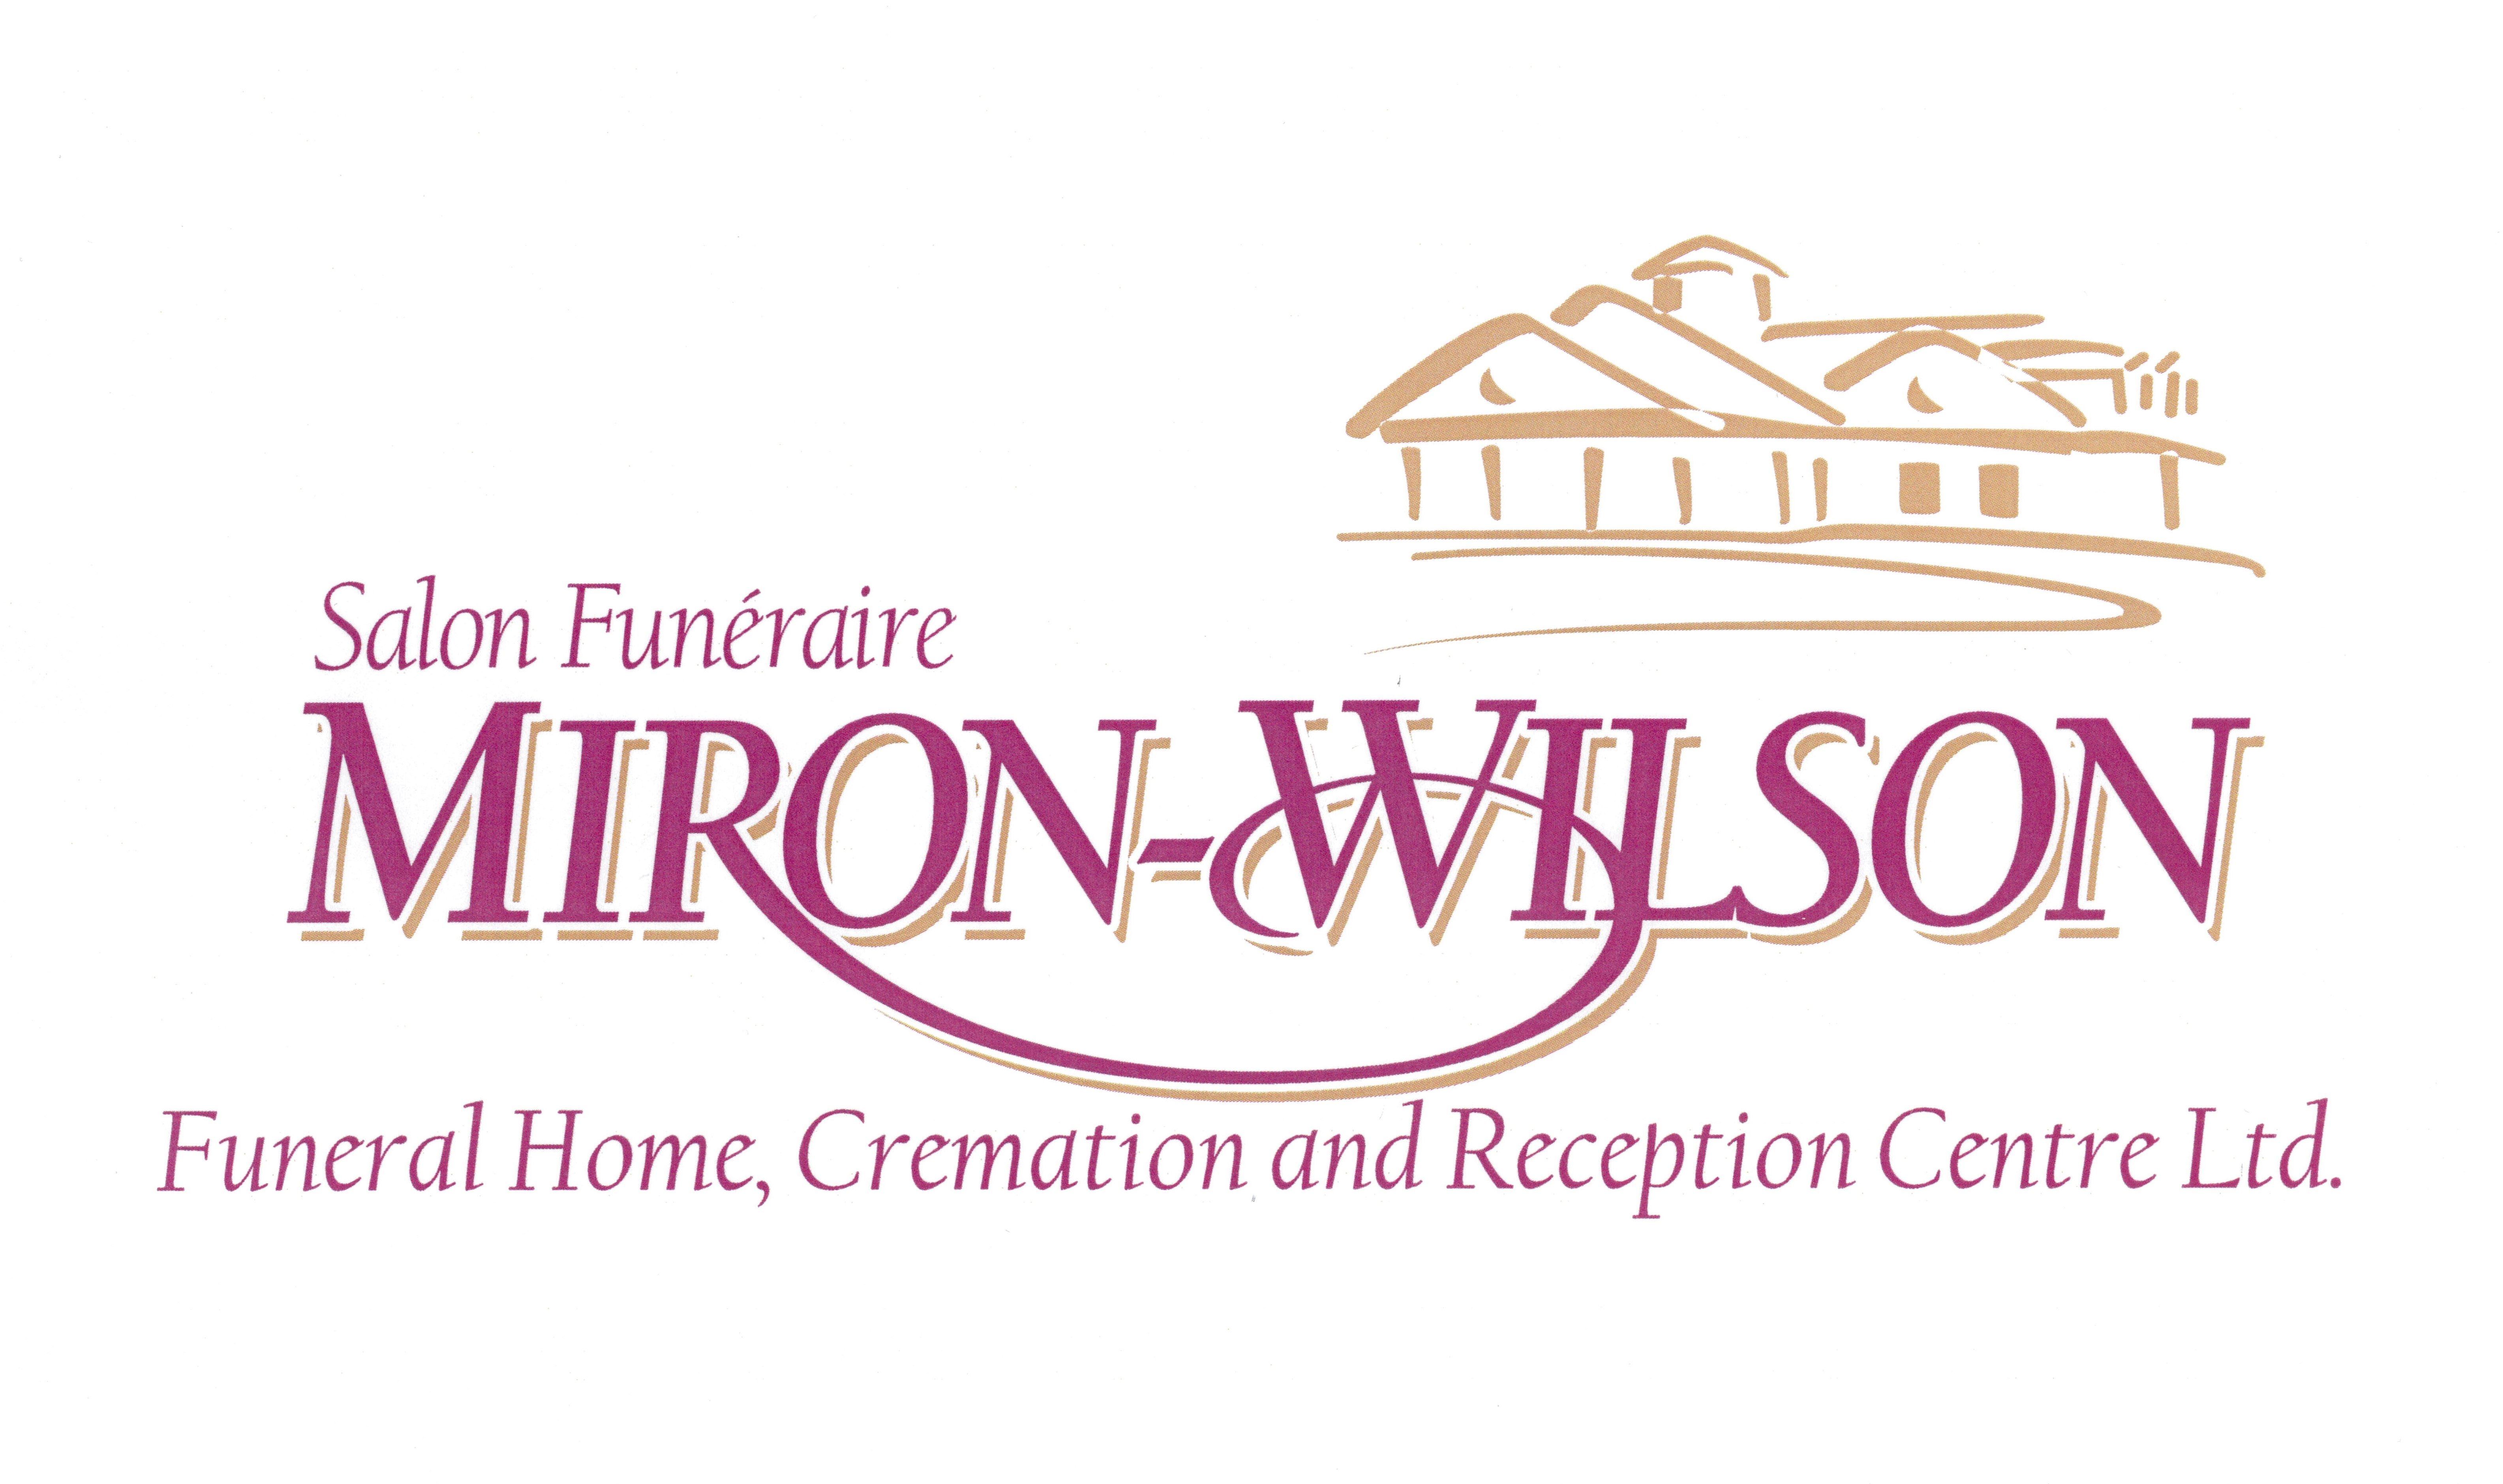 Miron-Wilson Funeral Home, Cremation and Reception Centre Ltd.